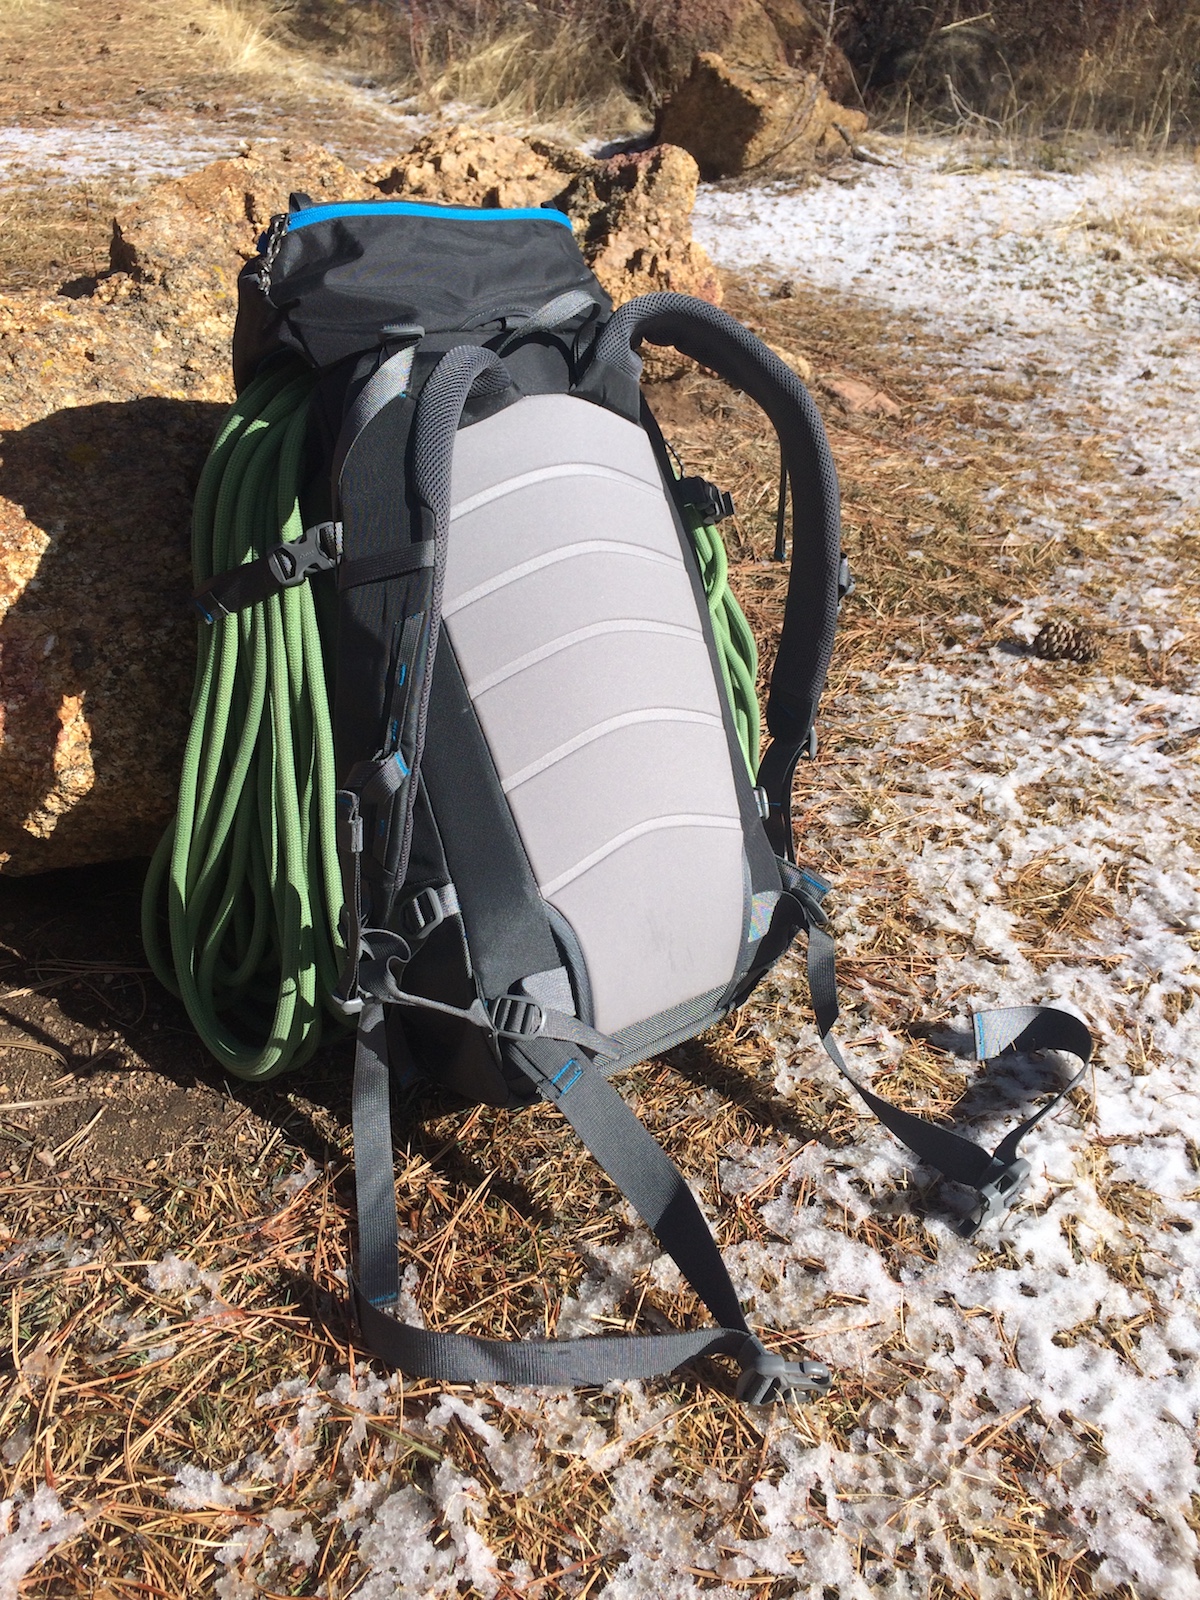 The Warthog 40L Pack, showing the unpadded hip belt, the simple back panel, and the non-expandable, fixed lid. [Photo] Mike Lewis